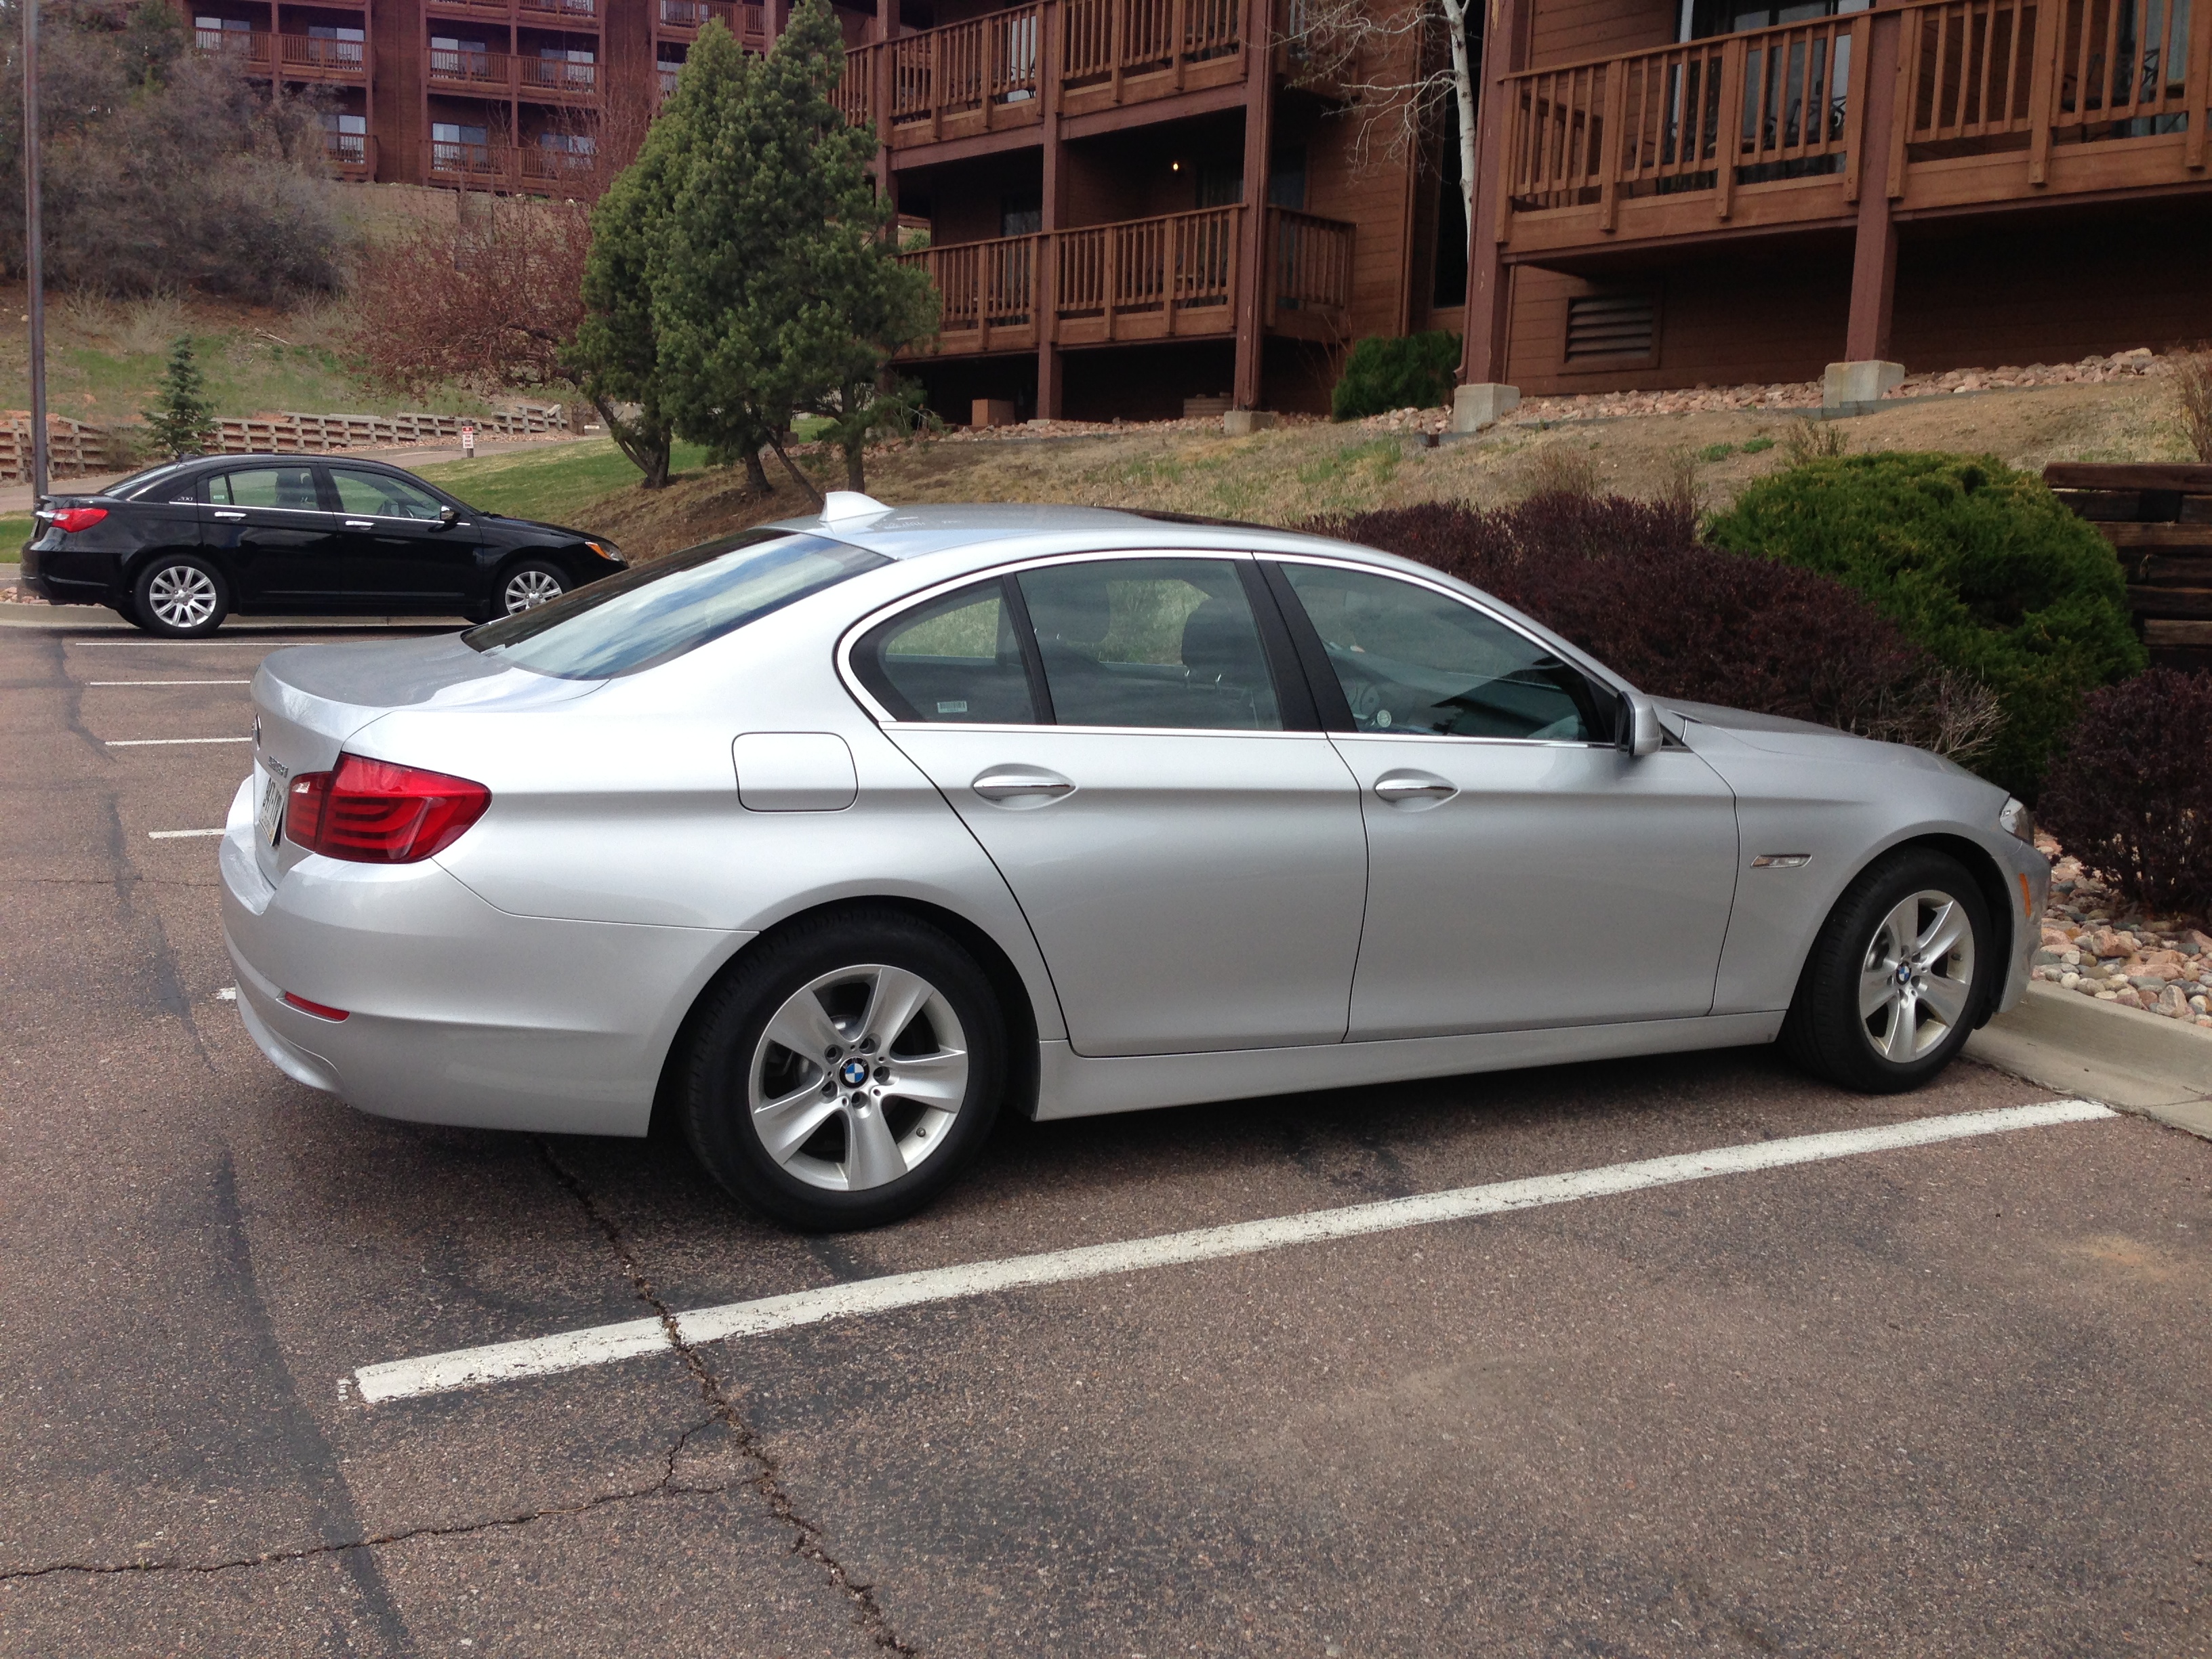 My Unexpected BMW 528i Upgrade from Avis! • Point Me to the Plane